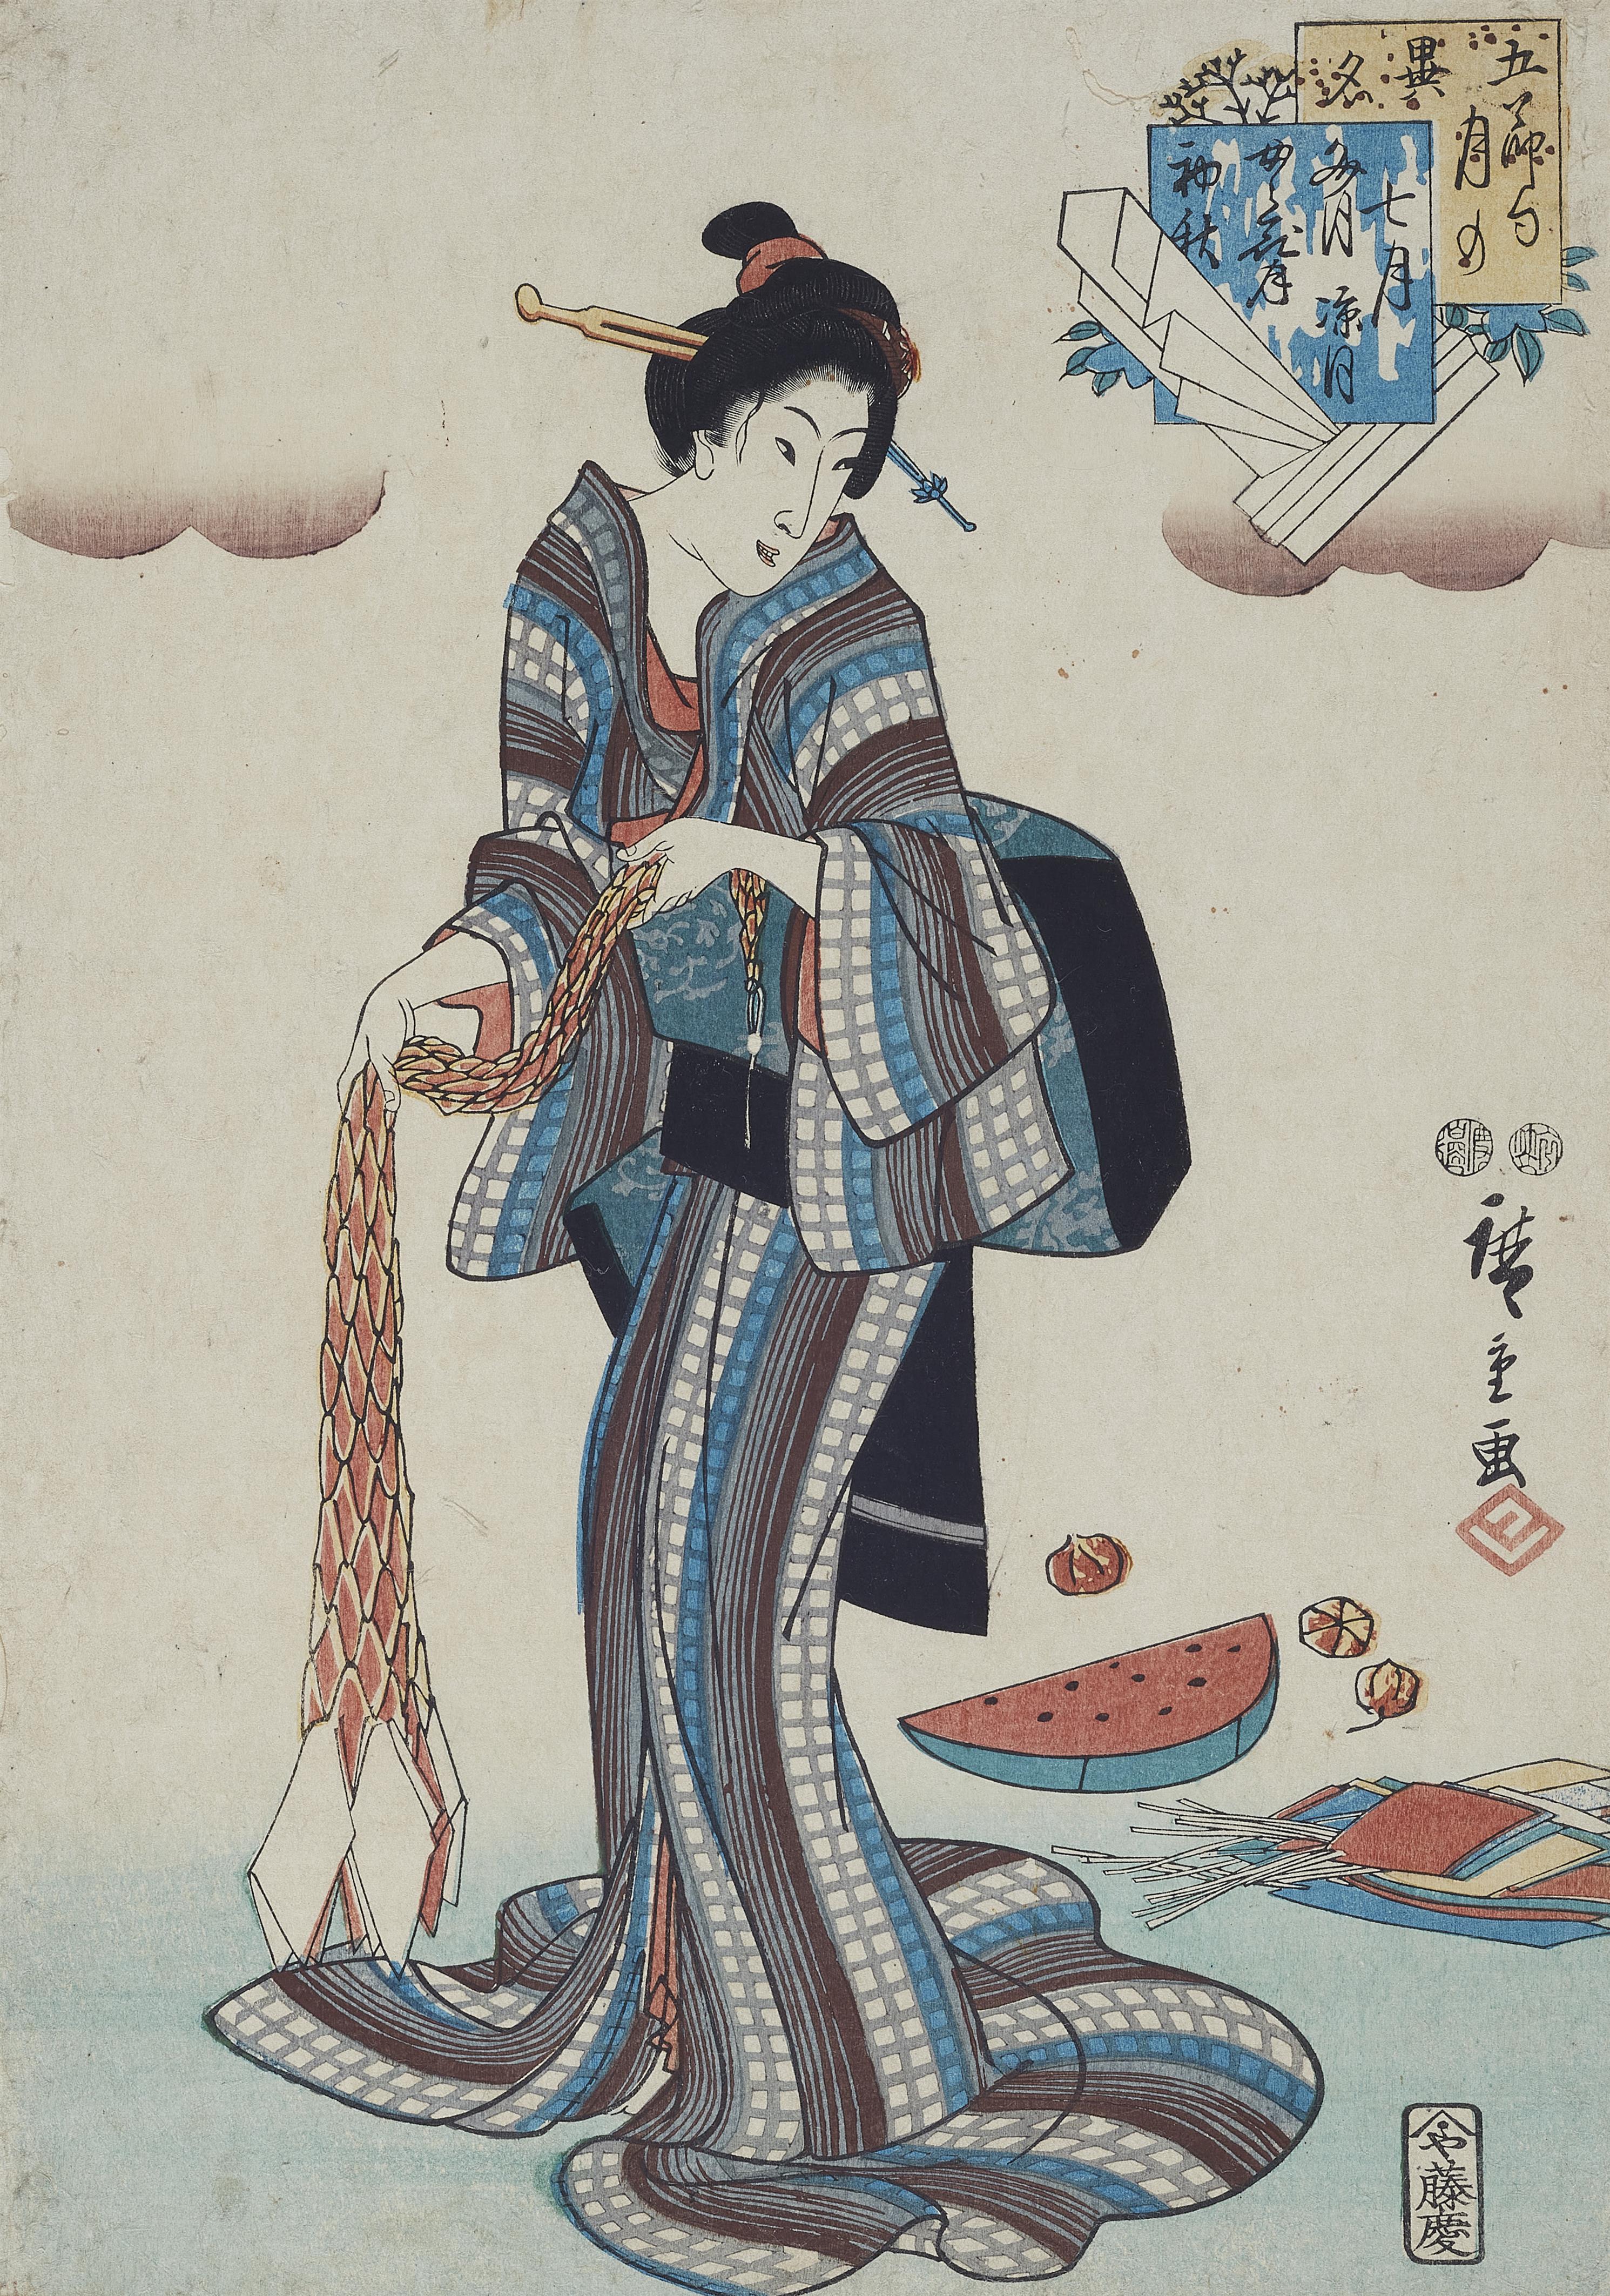 Utagawa Hiroshige - A young woman in the middle of preparations for the Tanabata festival - image-1